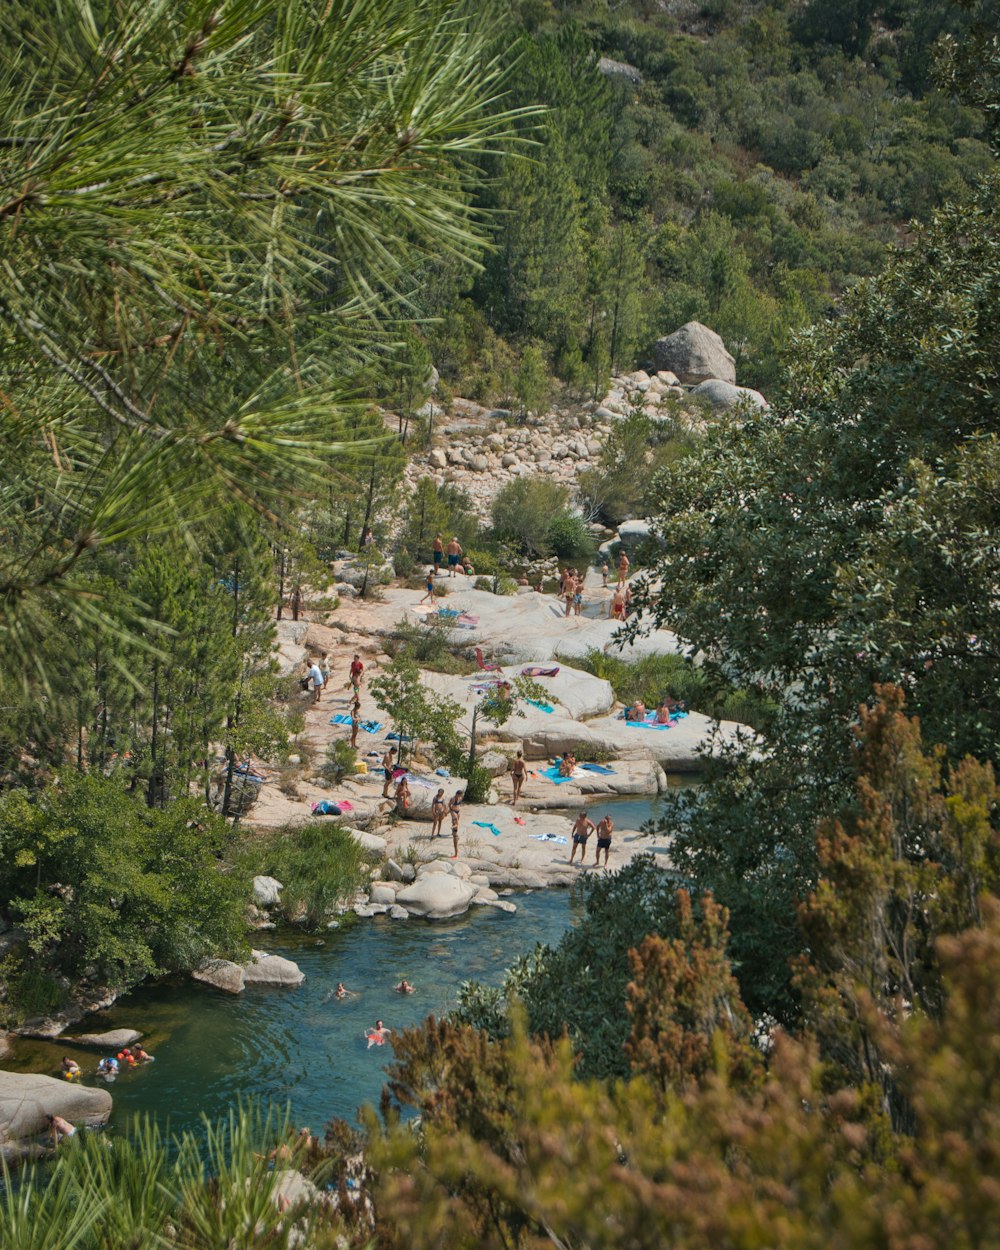 a group of people swimming in a river surrounded by trees